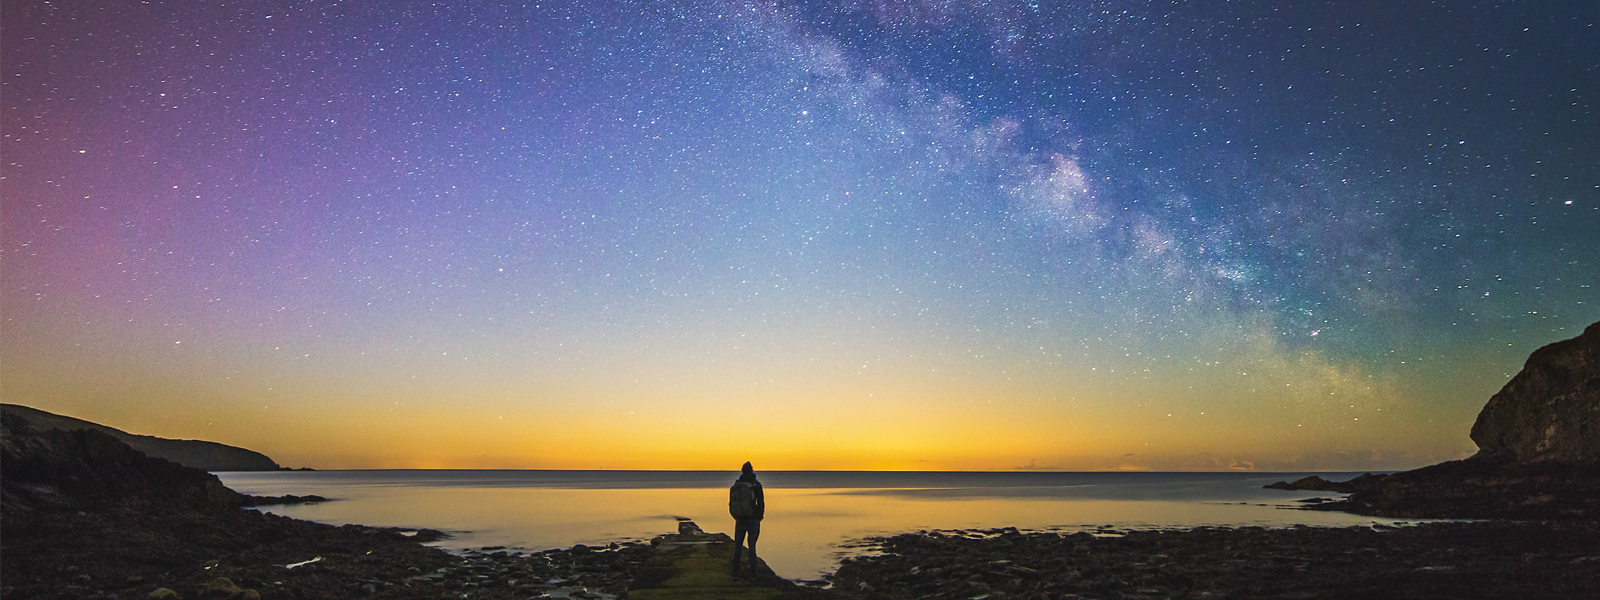 A man looking up at the starry sky at Port Soderick, on the east coast of the Isle of Man.